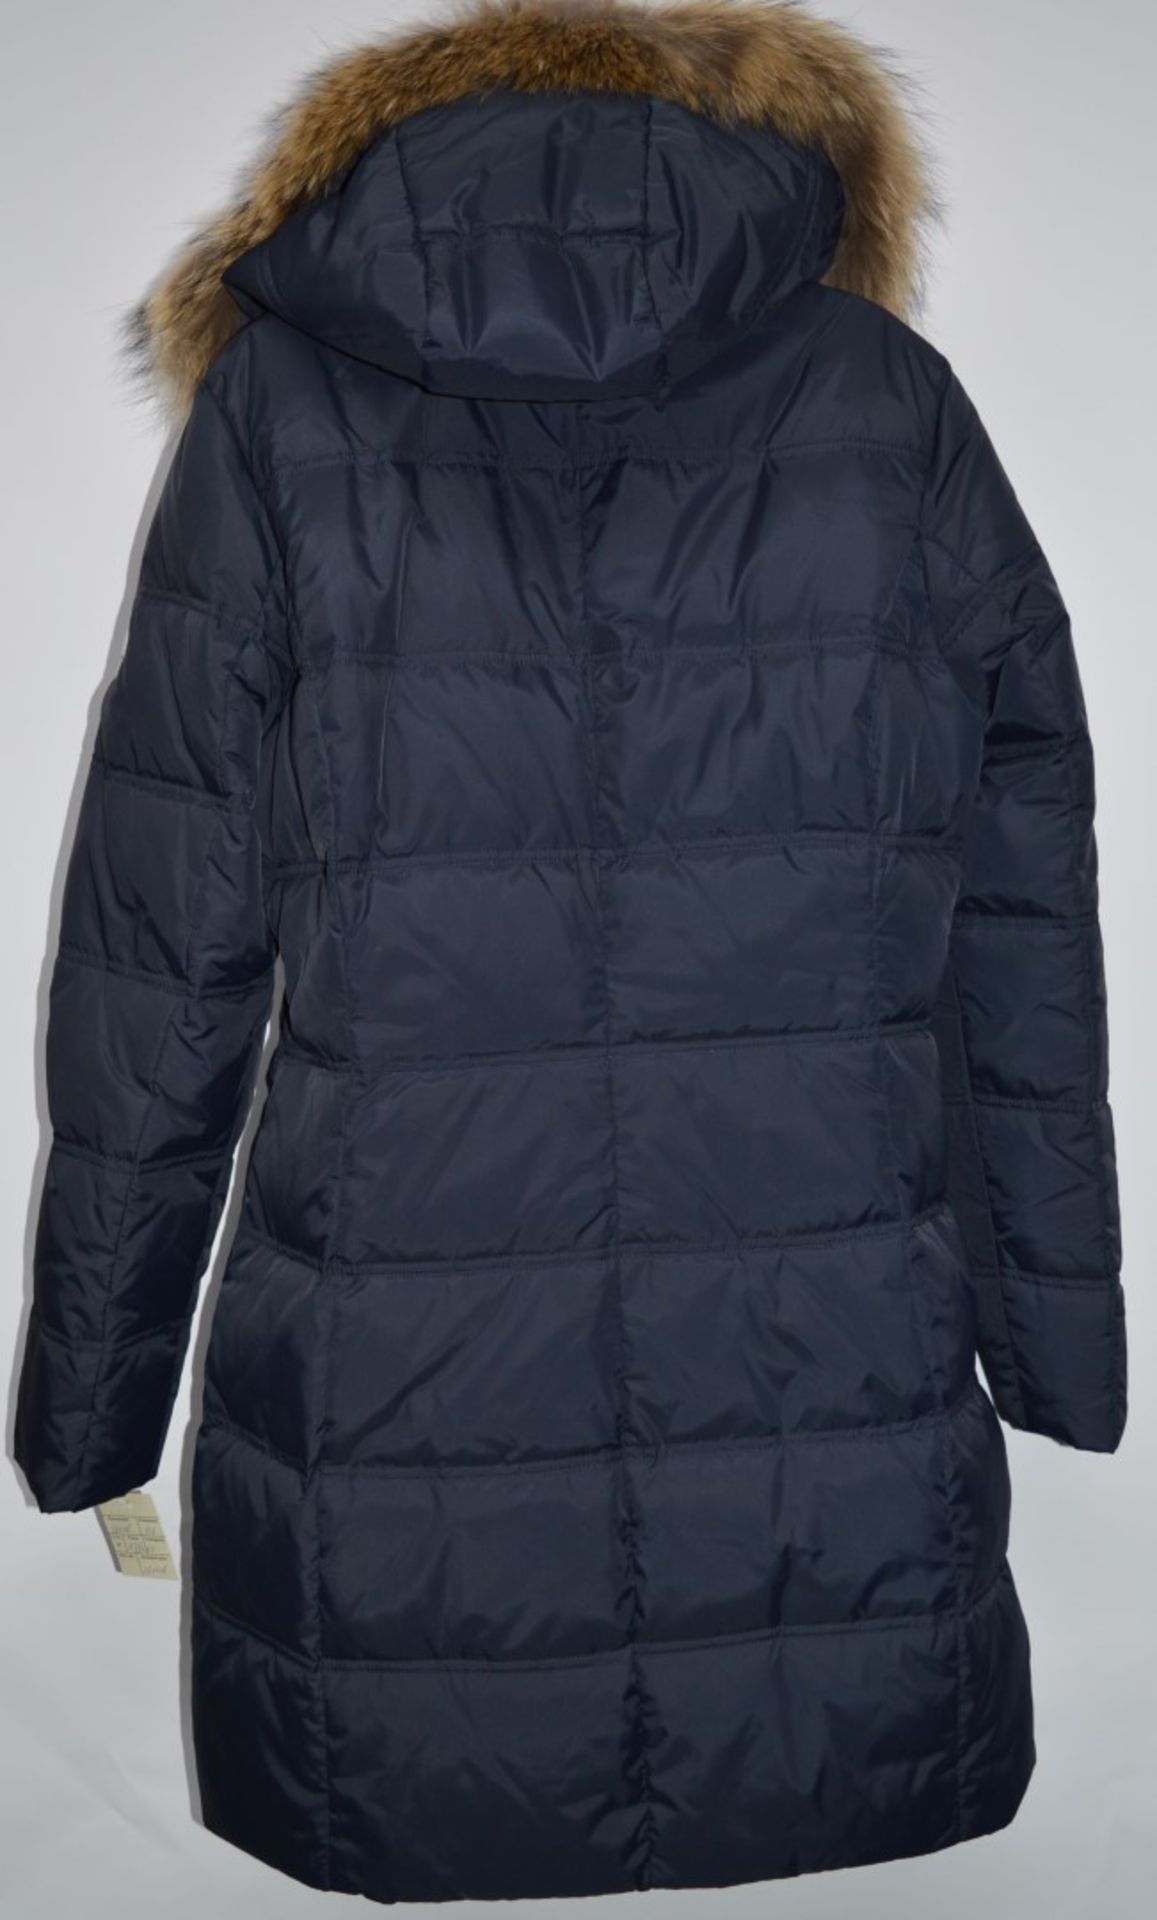 1 x Steilmann Womens Parker Coat - Real Down Feather Filled Coat With Functional Pockets, Inner - Image 2 of 12